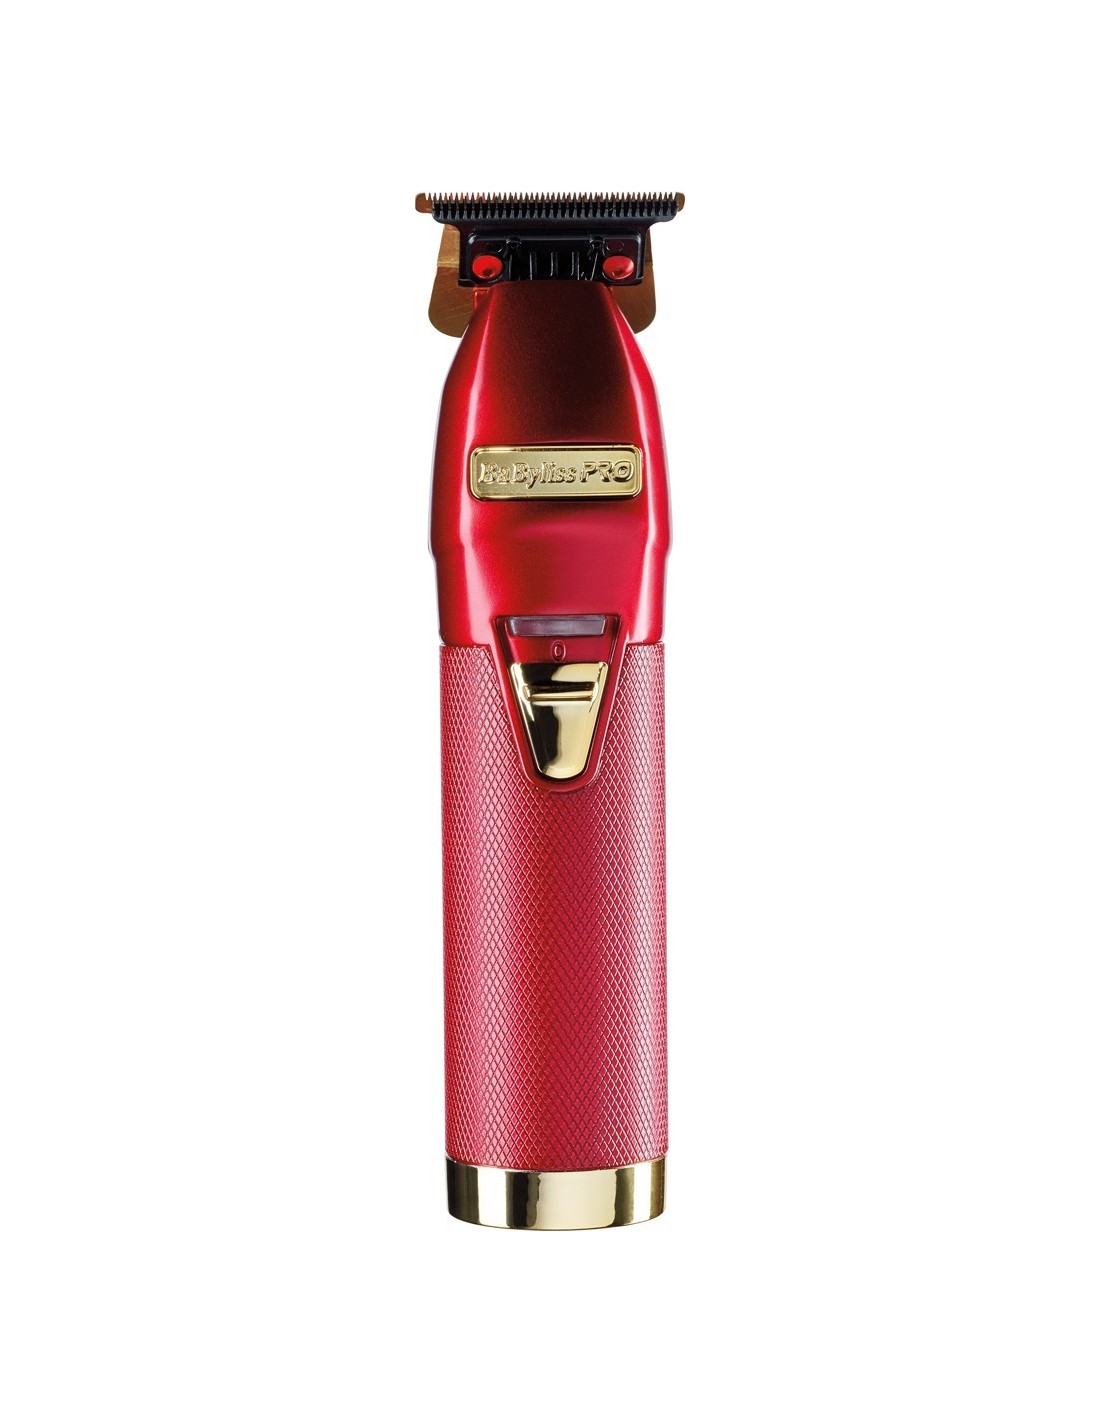 red fx babyliss